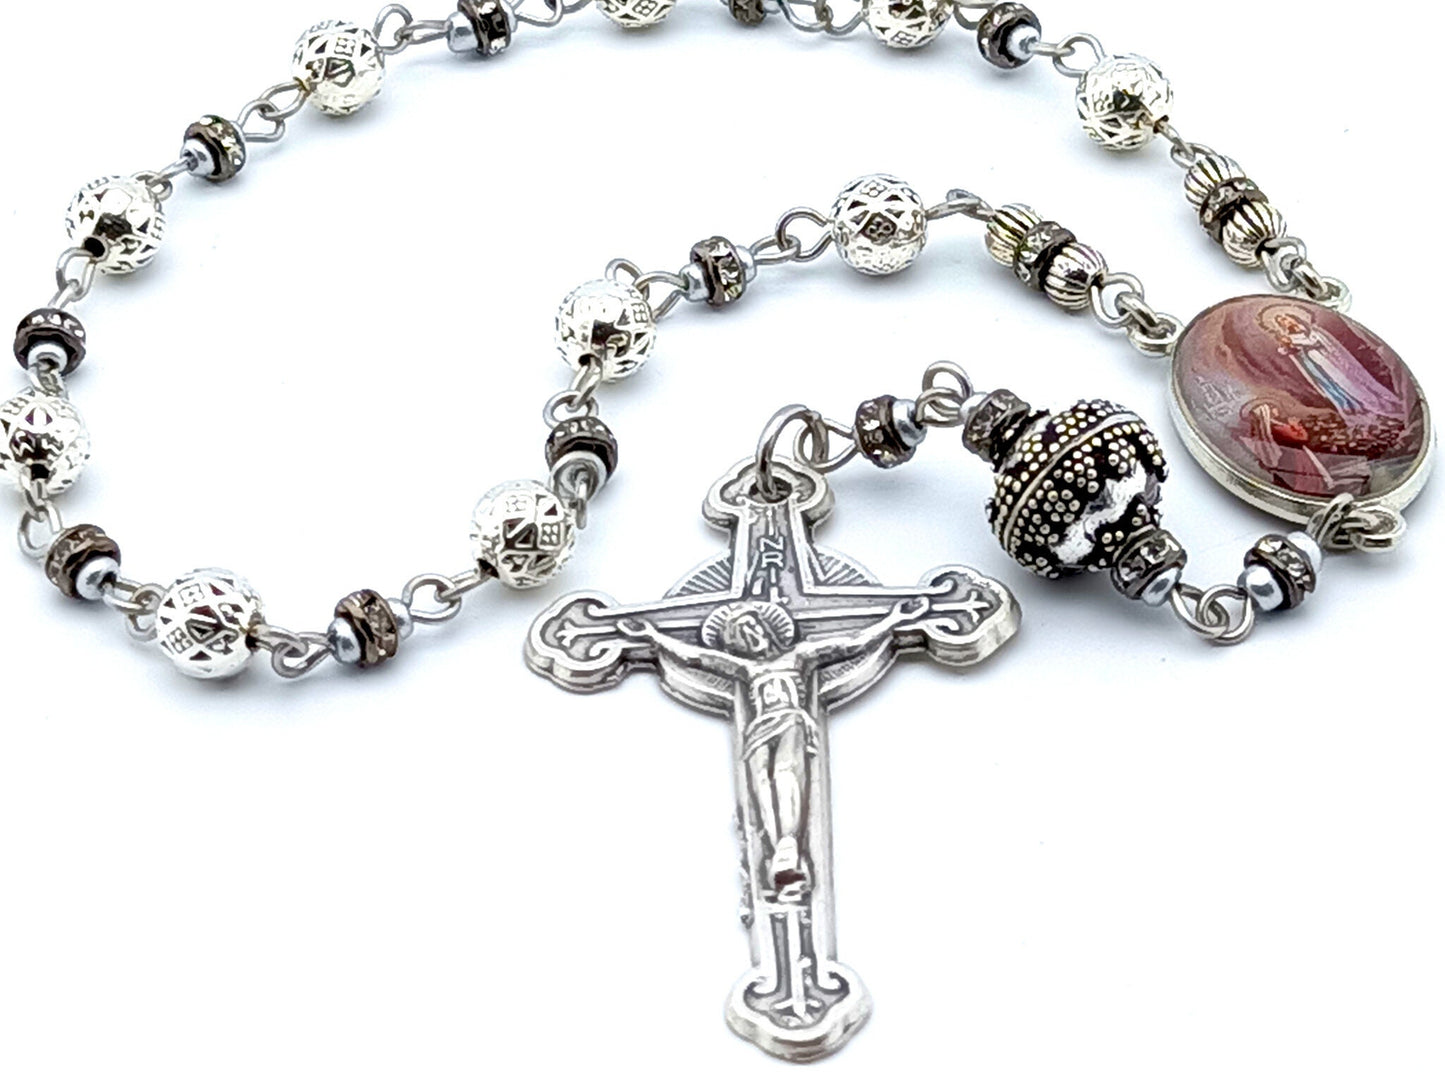 Saint Bernadette and Our Lady of Lourdes unique rosary beads single decade rosary with silver beads, picture centre medal and crucifix.